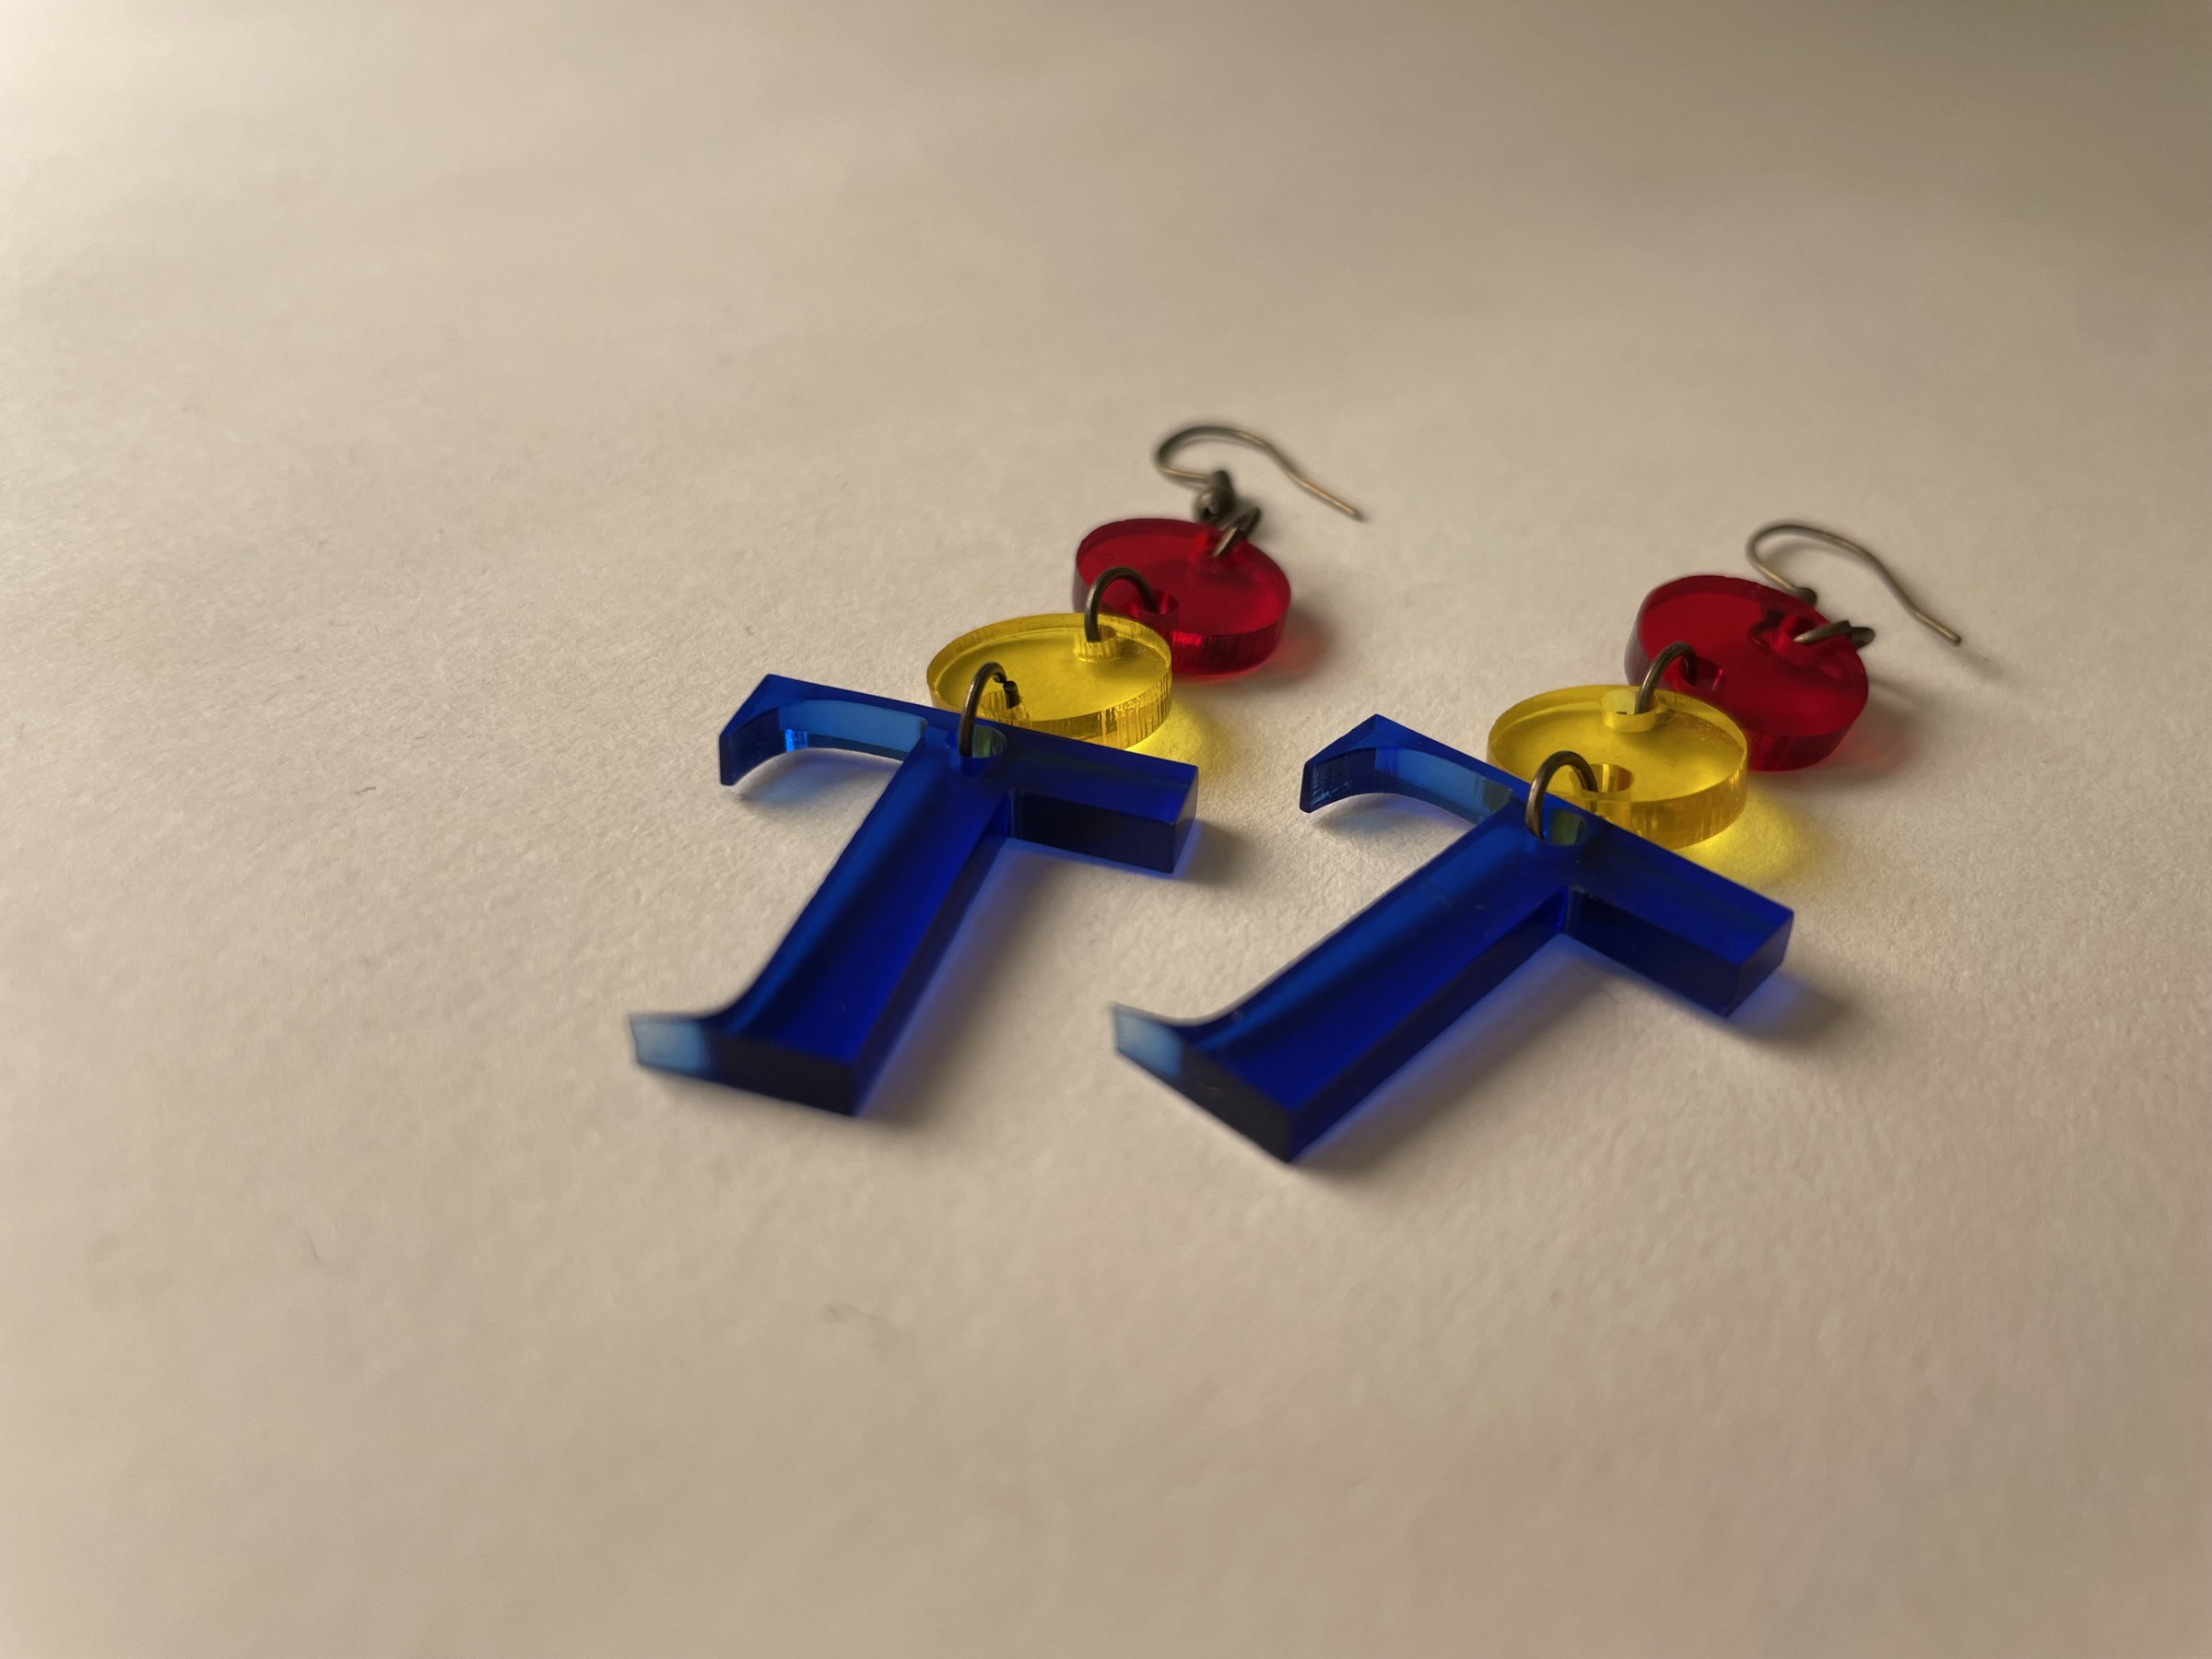 Two earrings that are laser-cut acrylic T shapes with two circle shapes added to the top of the T lay flat on a blank surface